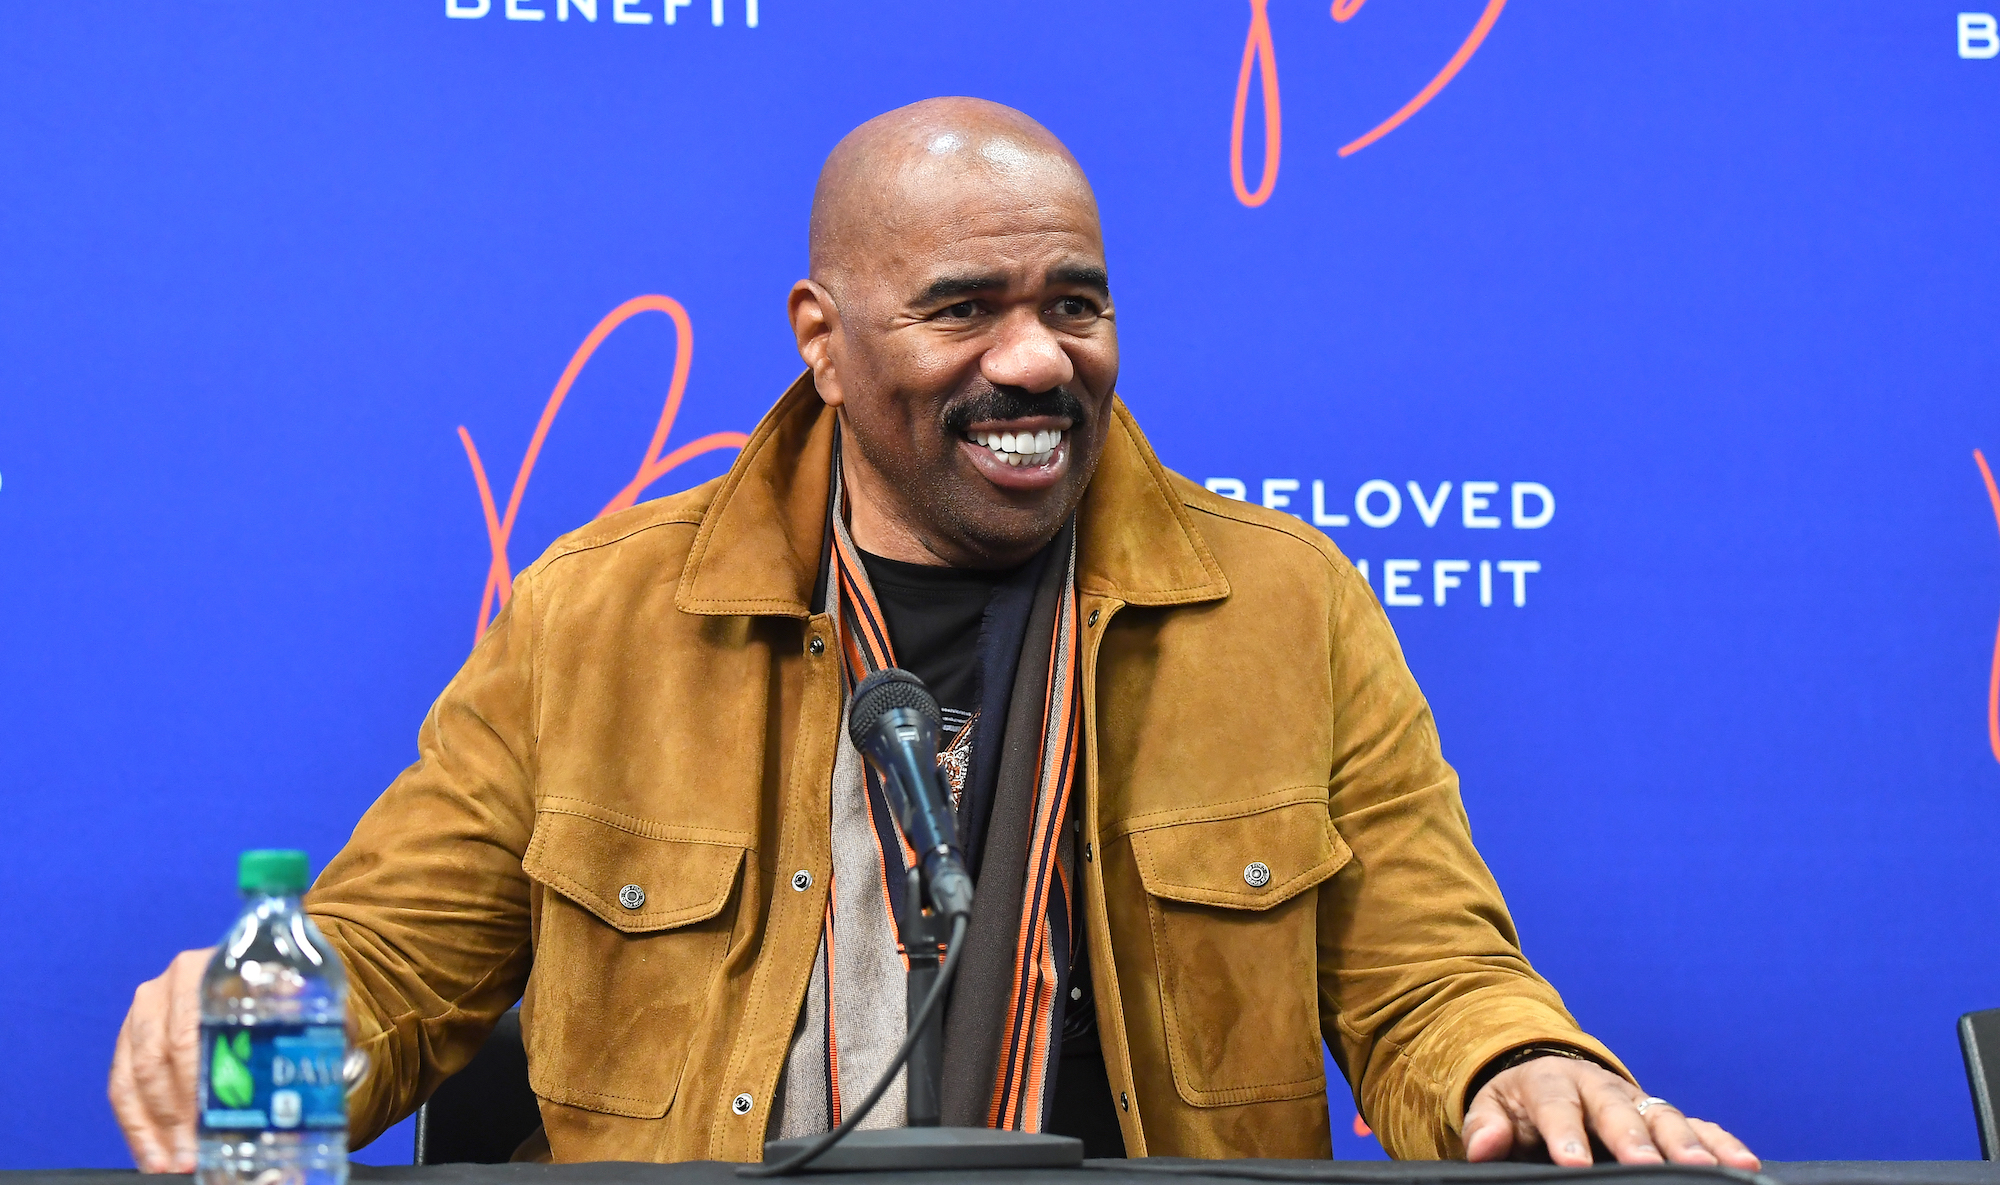 Steve Harvey Experienced Homelessness for 3 Years — ‘It Was Rock Bottom’